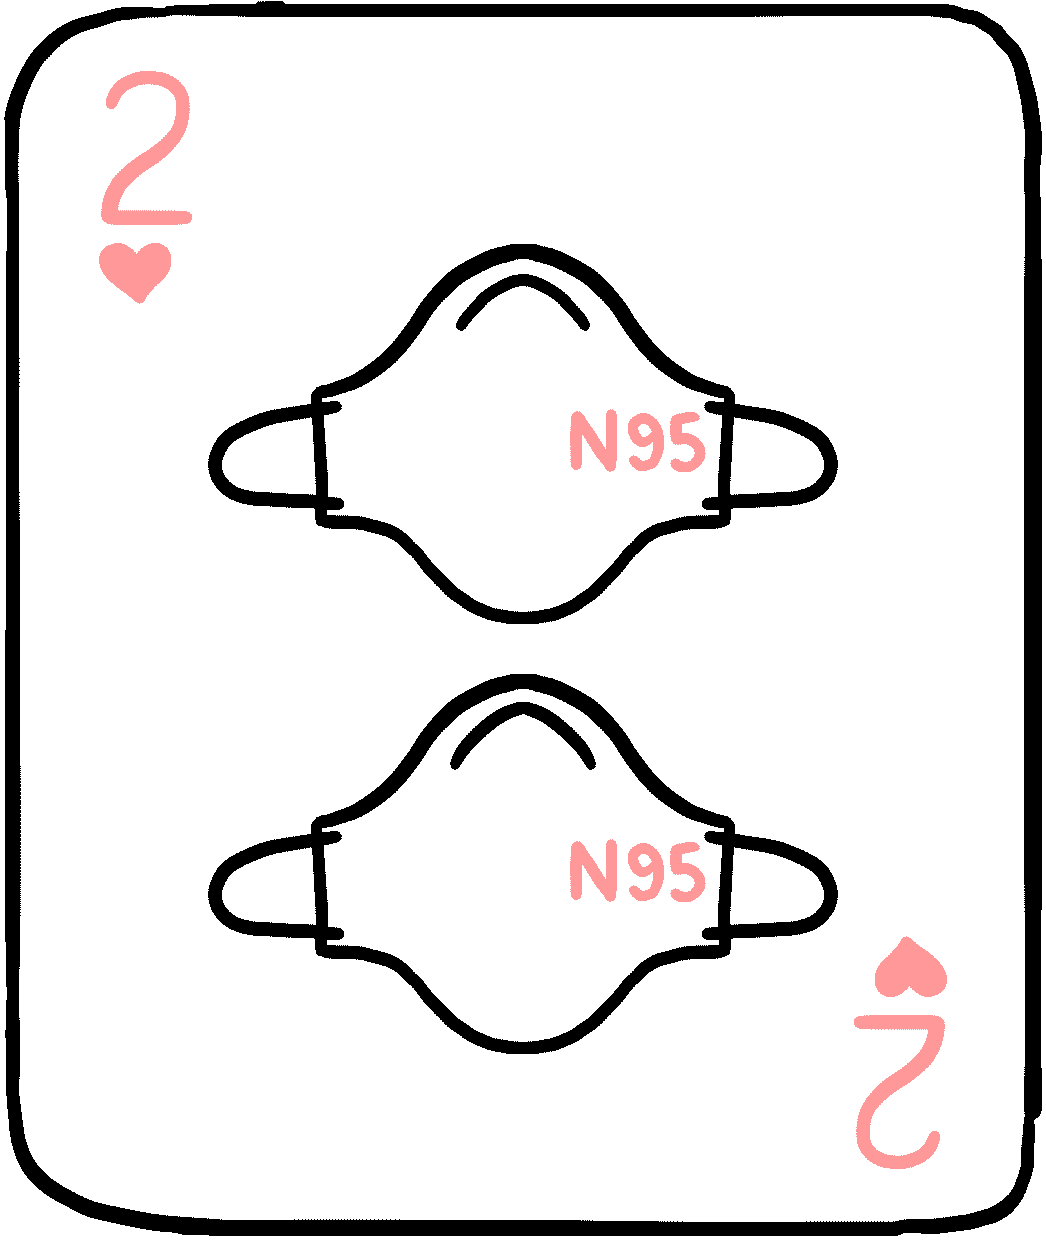 A two of hearts with an N95 mask on the front